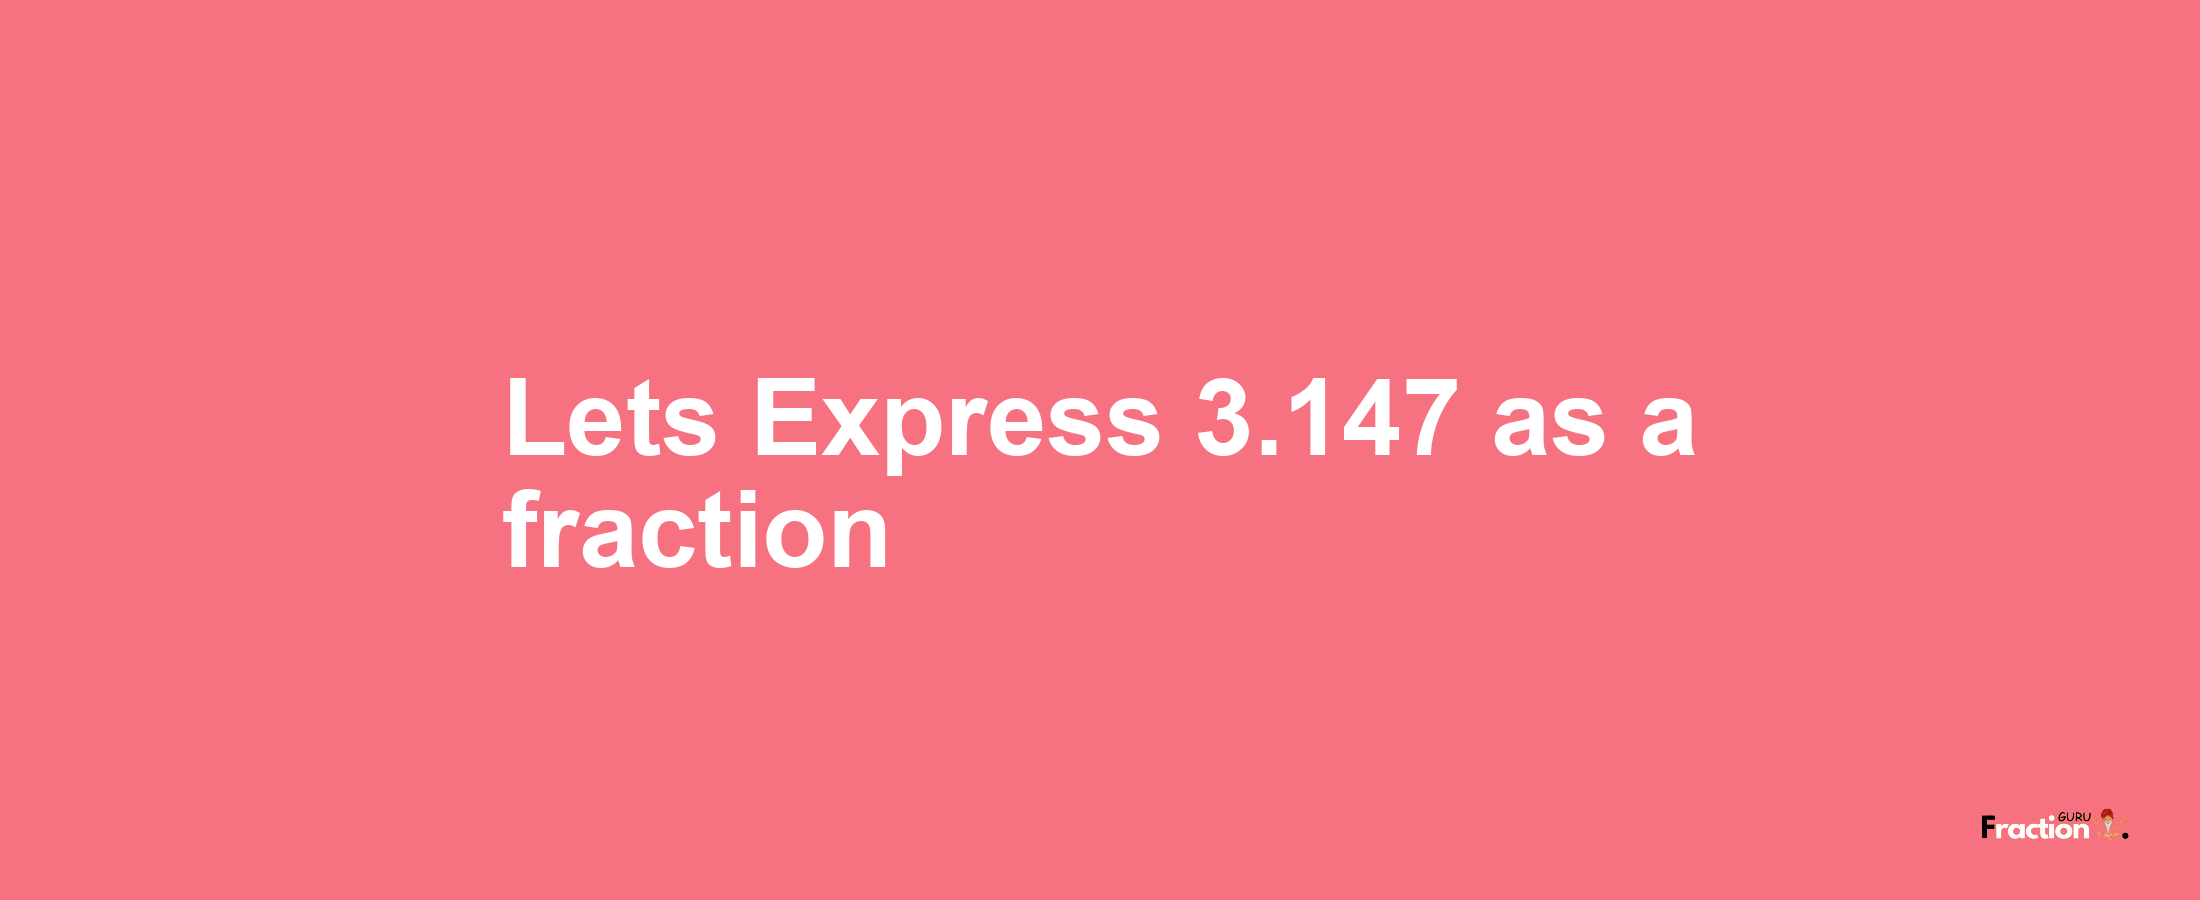 Lets Express 3.147 as afraction